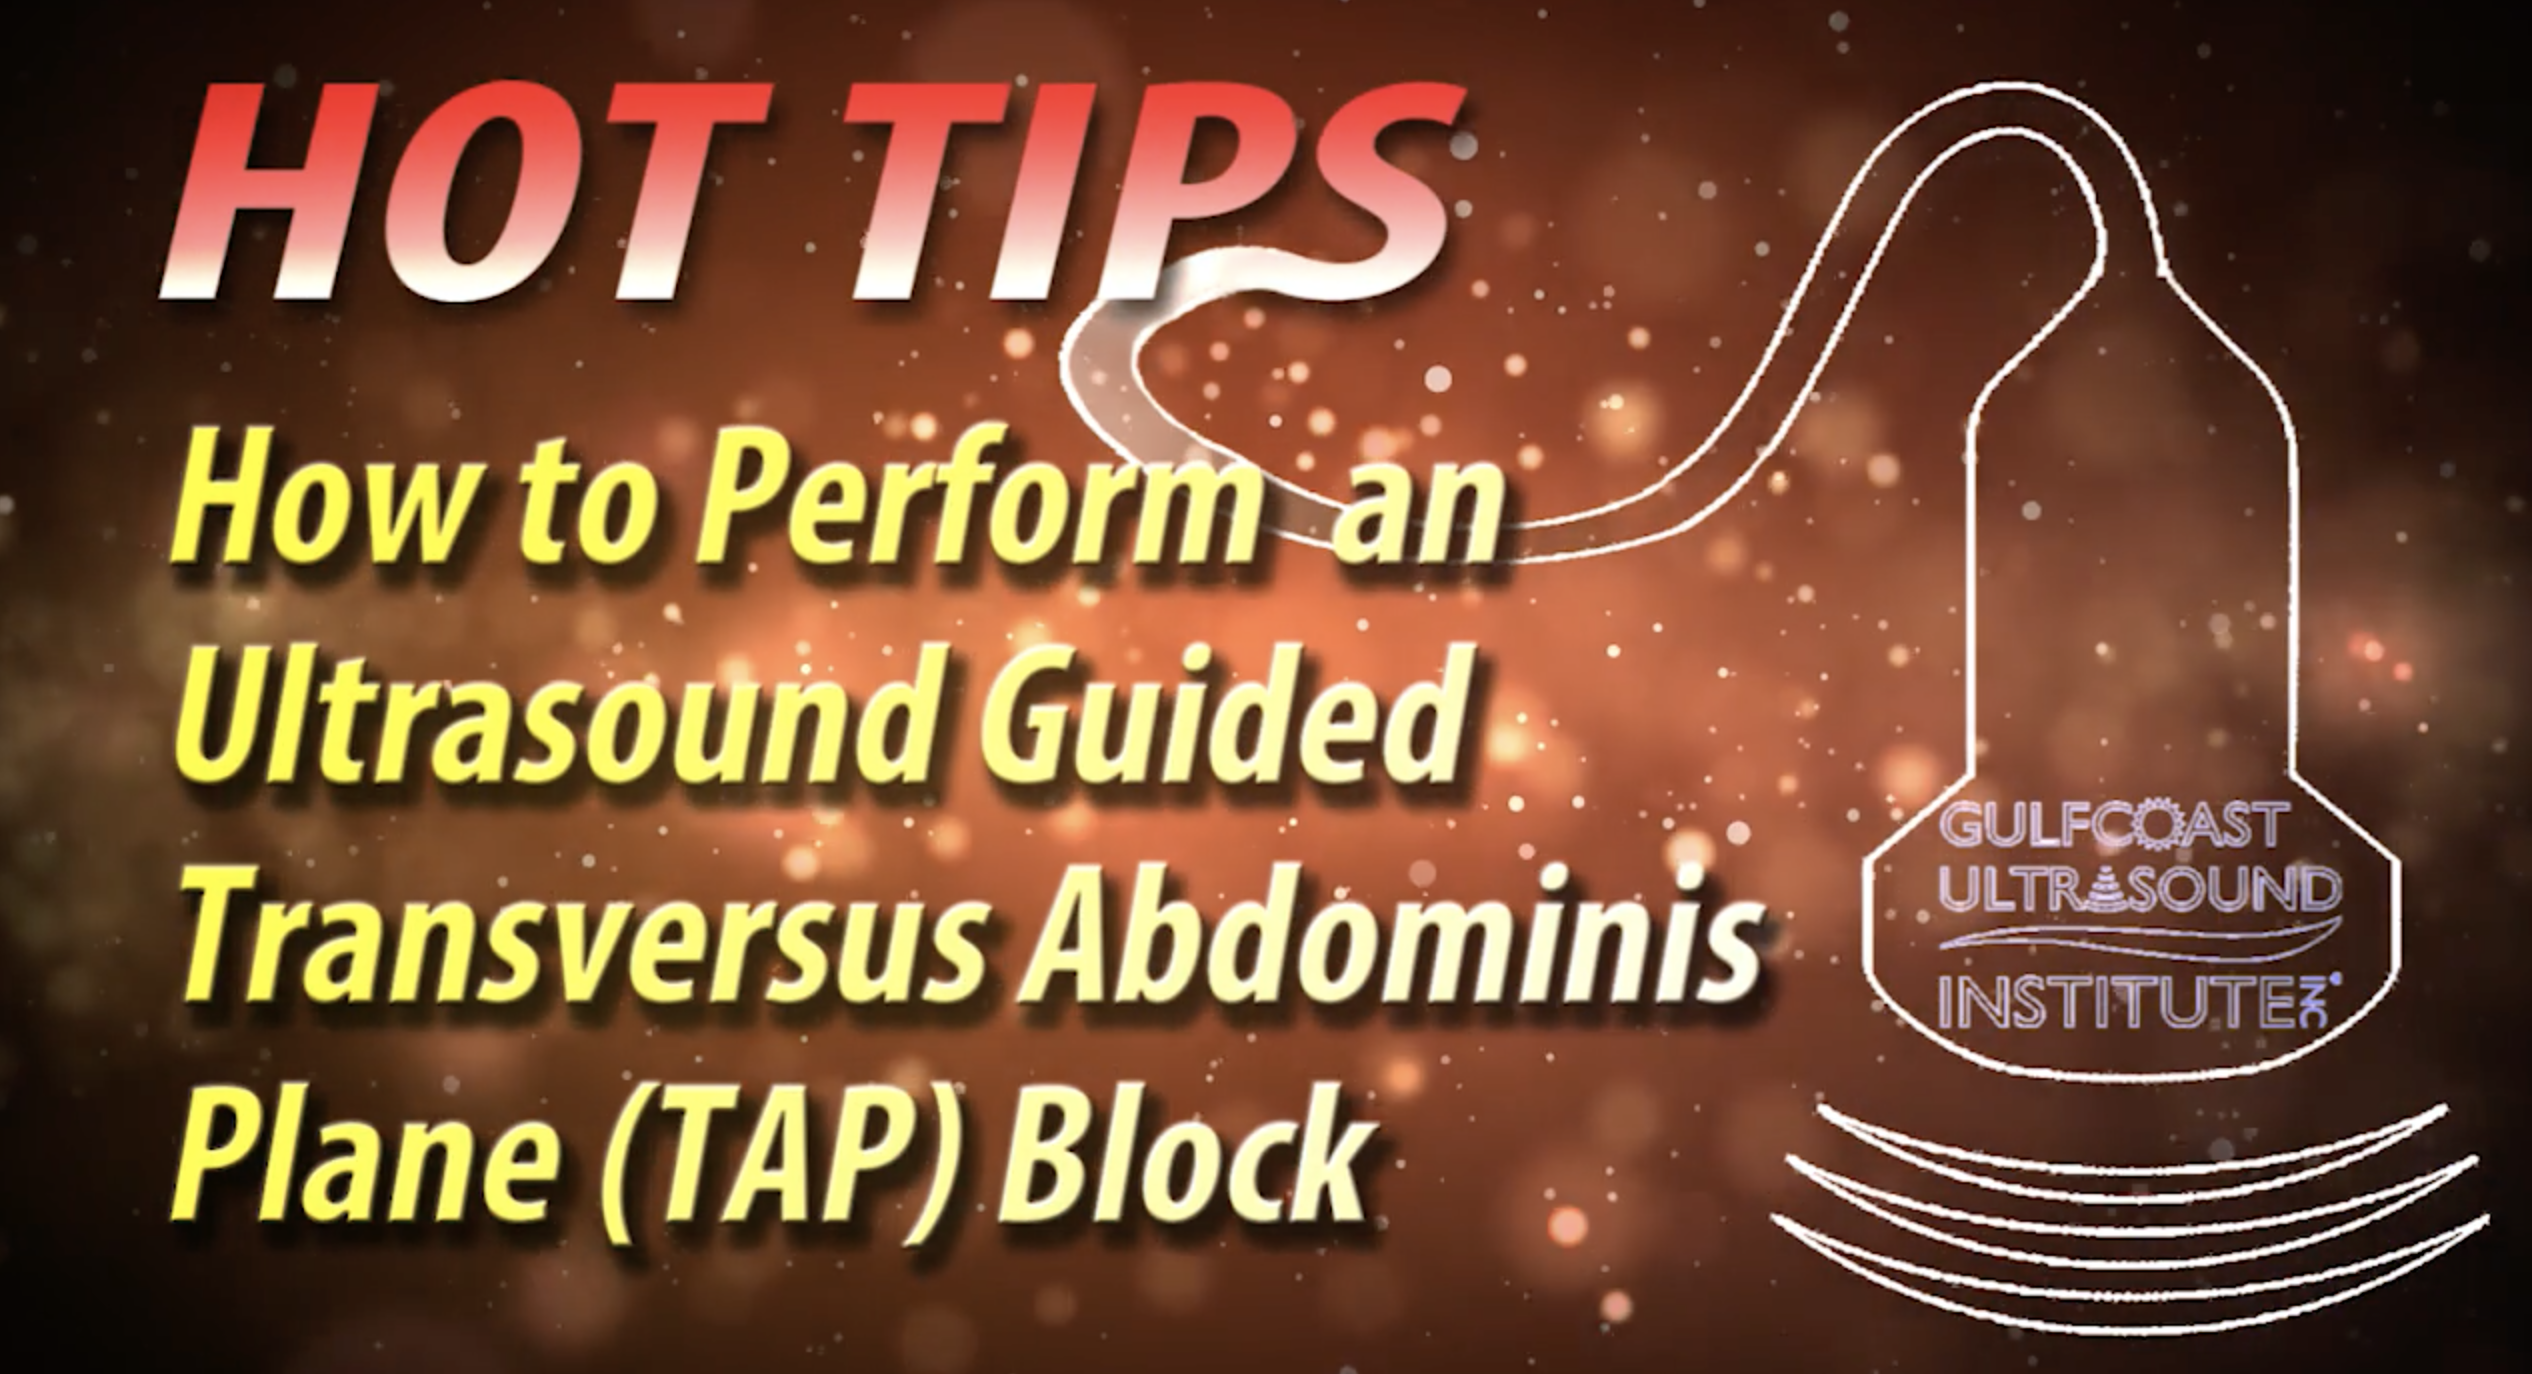 How to Perform an Ultrasound Guided Transversus Abdominis Plane (TAP) Block